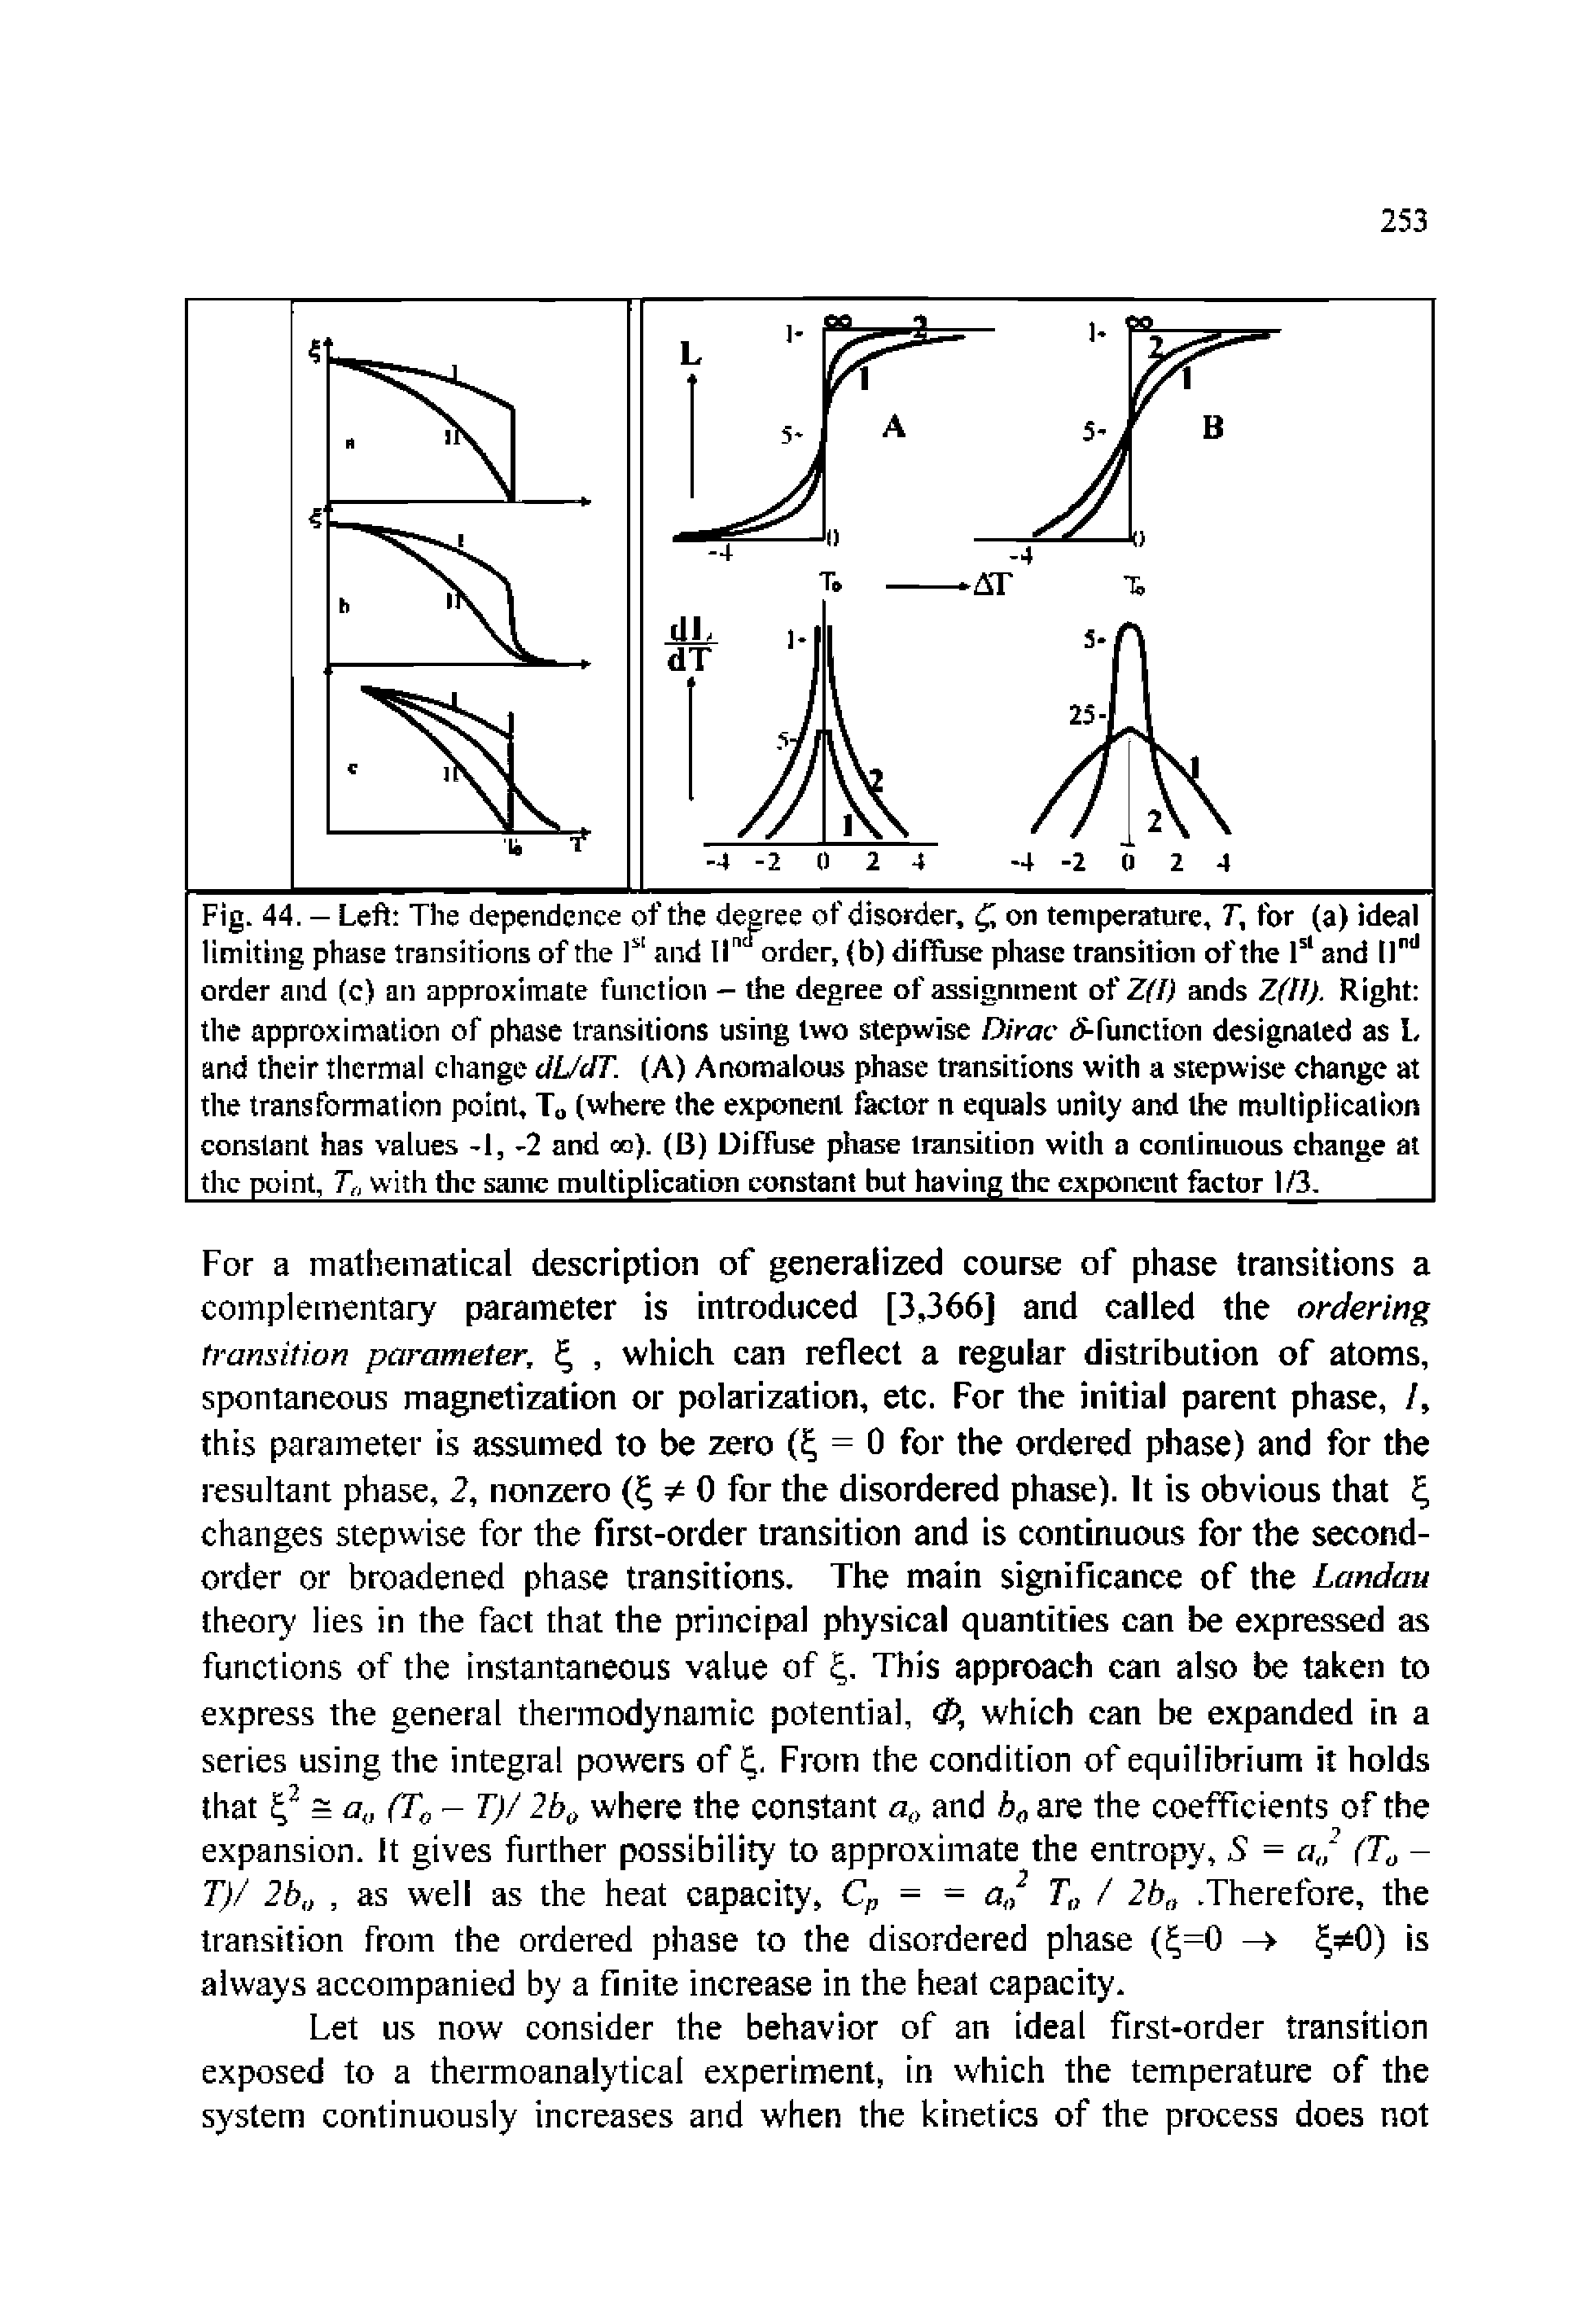 Fig. 44. - Left The dependence of the degree of disorder, Q on temperature, T, for (a) ideal limiting phase transitions of the l and 11" order, (b) diffuse phase transition of the and II " order and (c) an approximate function — the degree of assignment of ZO) ands Z(H). Right the approximation of phase transitions using two stepwise Dirac function designated as L and their thermal change dUdT. (A) Anomalous phase transitions with a stepwise change at the transformation point. To (where the exponent factor n equals unity and the multipfication constant has values -1, -2 and oo). (B) Diffuse phase transition with a continuous change at tlic point, T with the same multiplication constant but having the exponent factor 1/3. ...